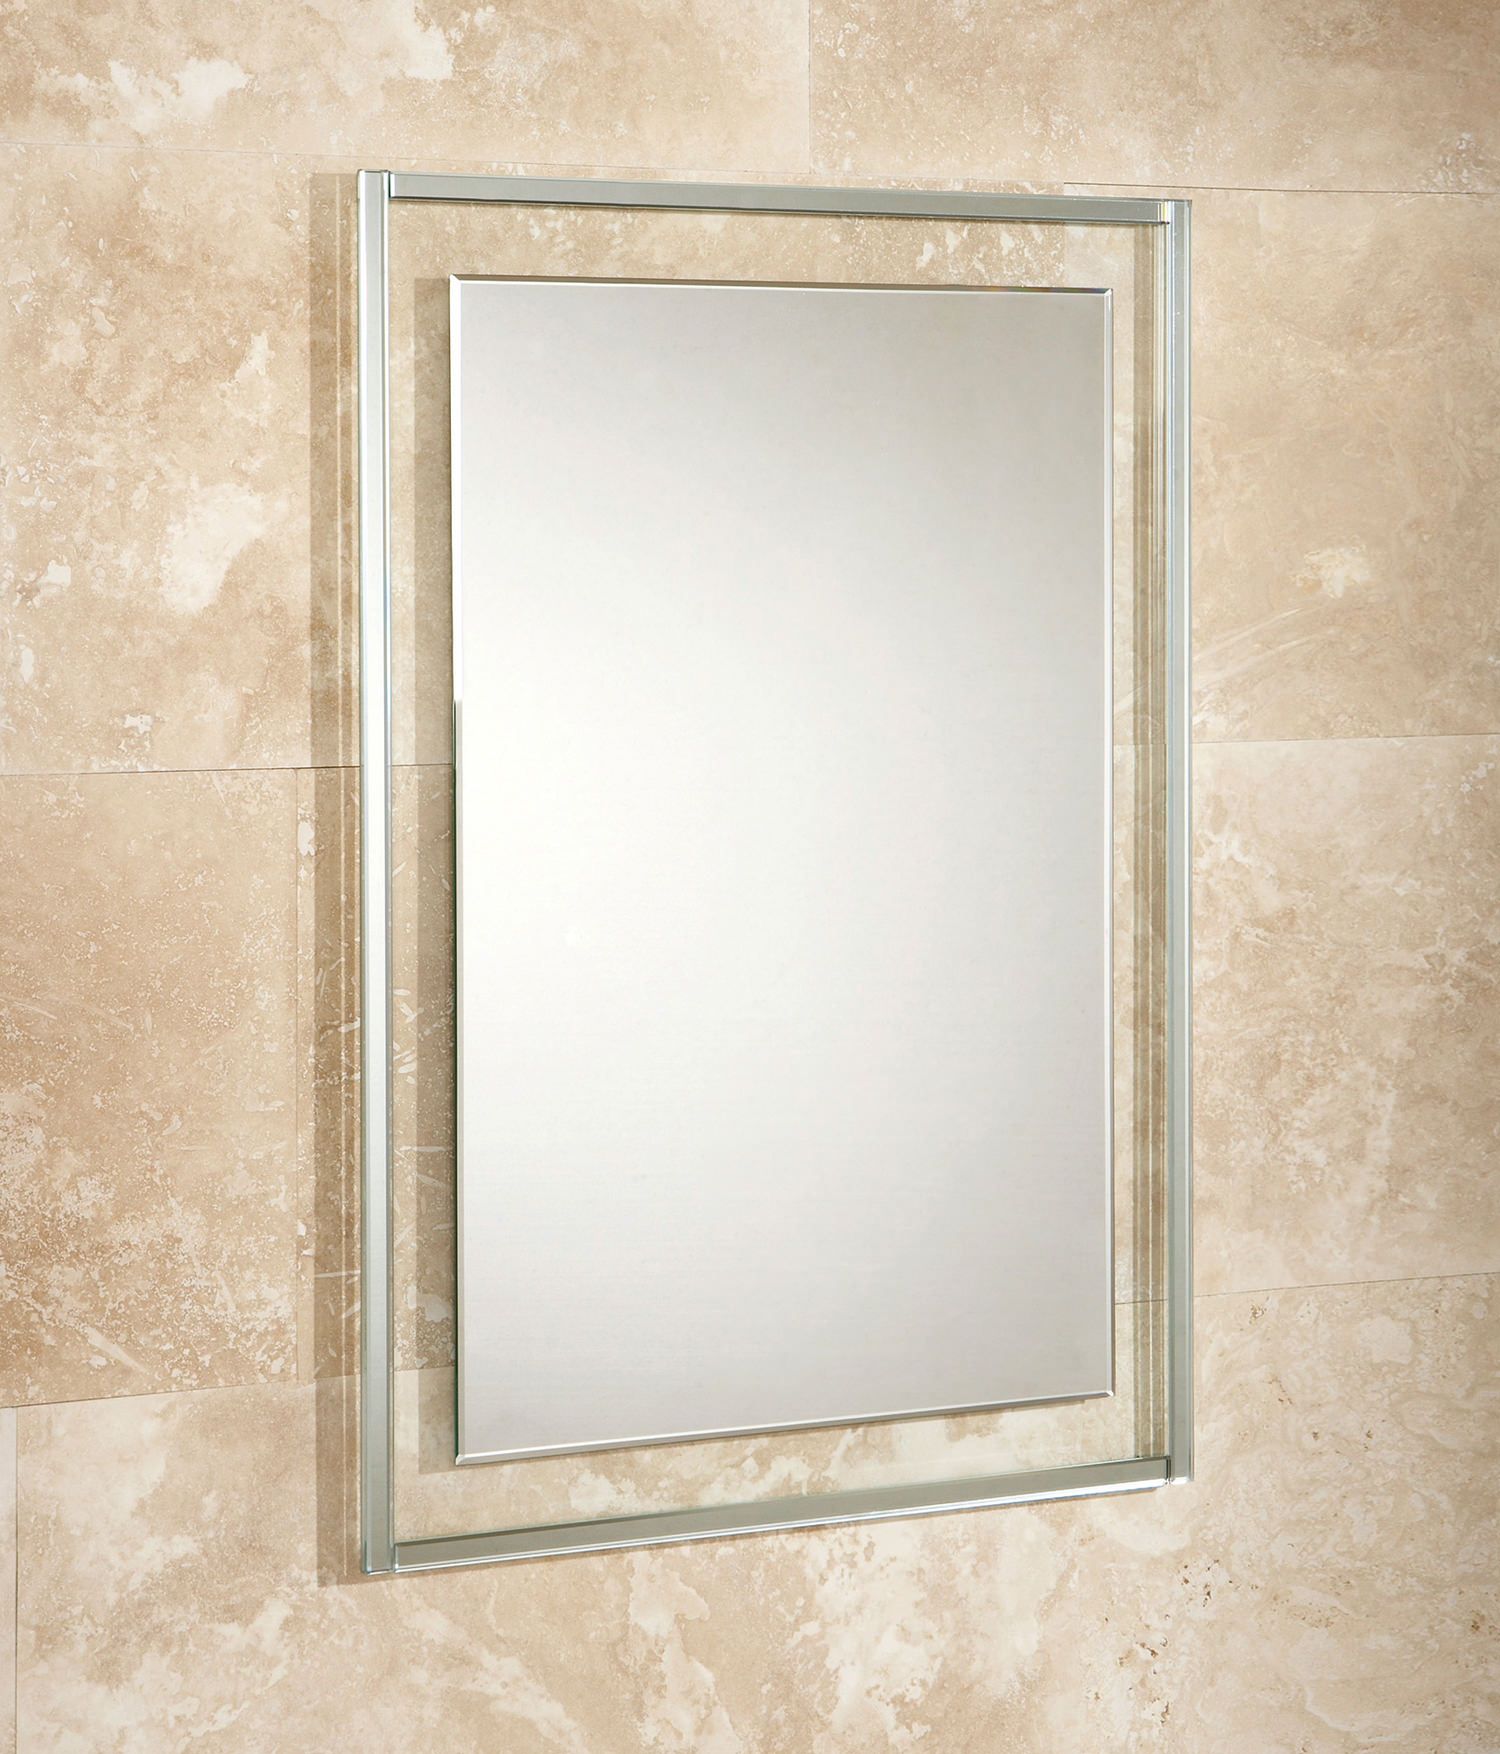 Hib Georgia Bevelled Edge Mirror On Clear Glass Frame 500 X 700mm Inside Clear Wall Mirrors (View 3 of 15)